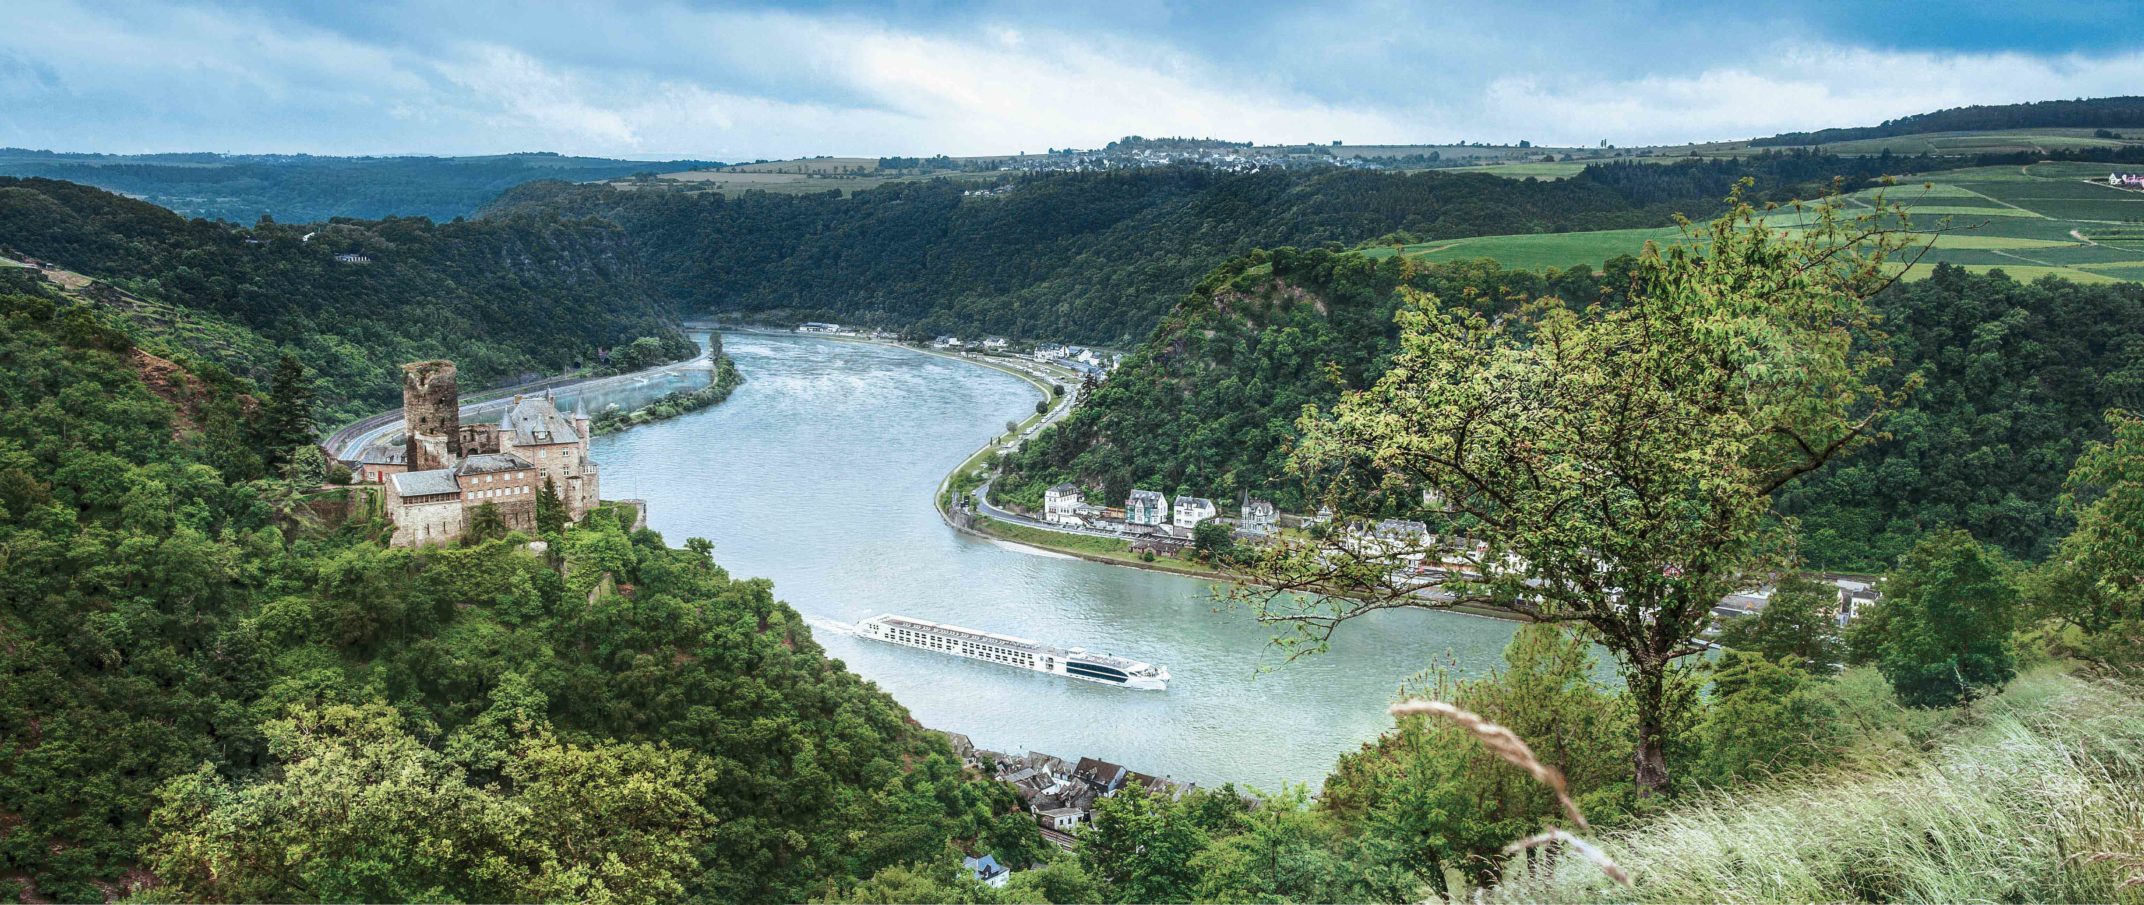 The Sustainable River Cruise Project